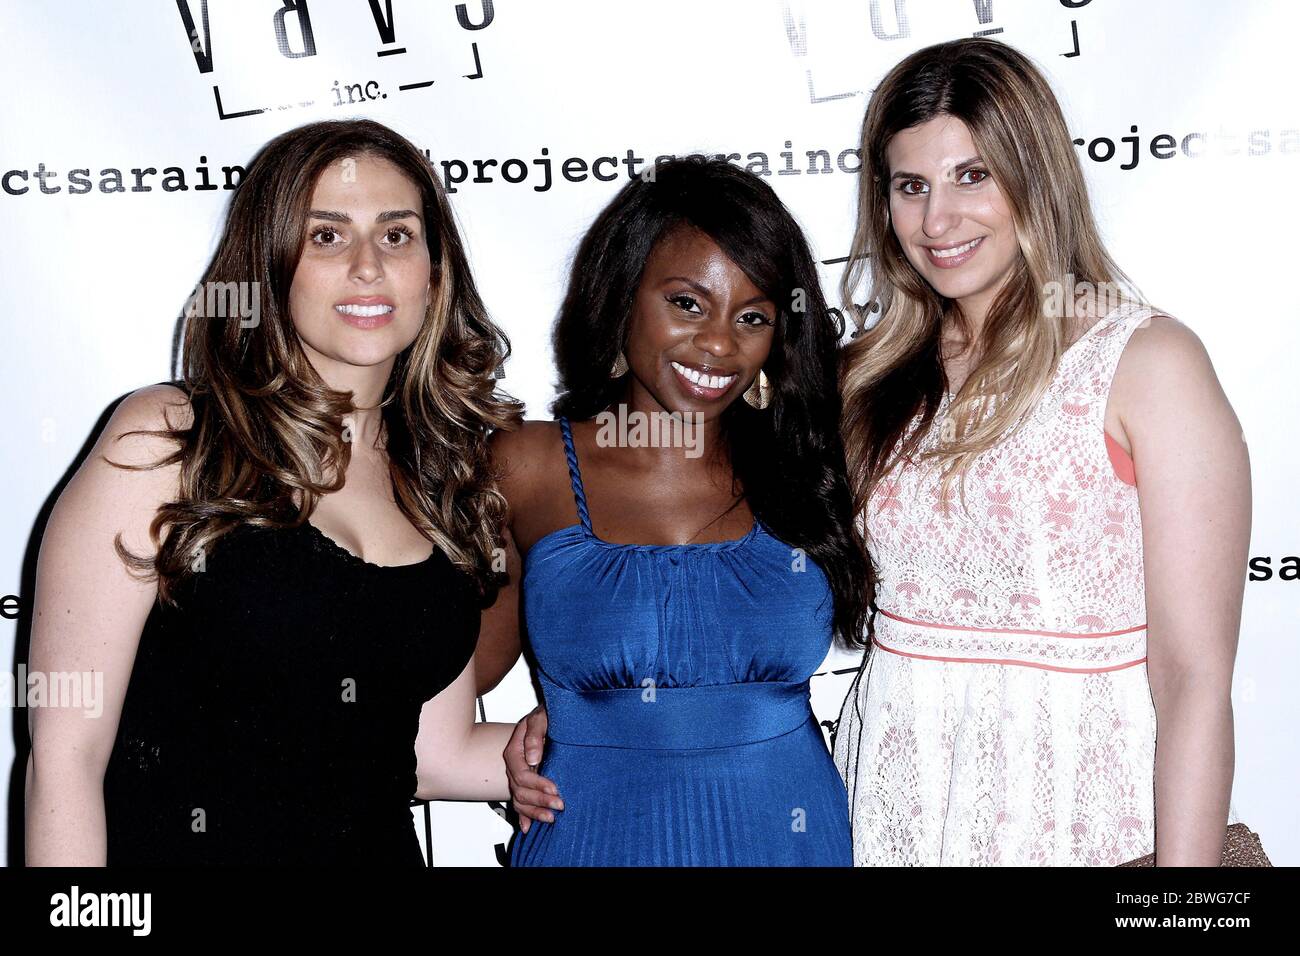 New York, NY, USA. 11 June, 2015. Z-100 NY overnight radio host, Shelley Rome, Co-host of VH1's morning show 'The Gossip Table', Delaina Dixon, Associate Producer at NBC Universal's Bravo TV, Chanel Omari at the Launch Of Dining Reconstructed: An Off Menu Experience at The Starrett Leigh Building. Credit: Steve Mack/Alamy Stock Photo